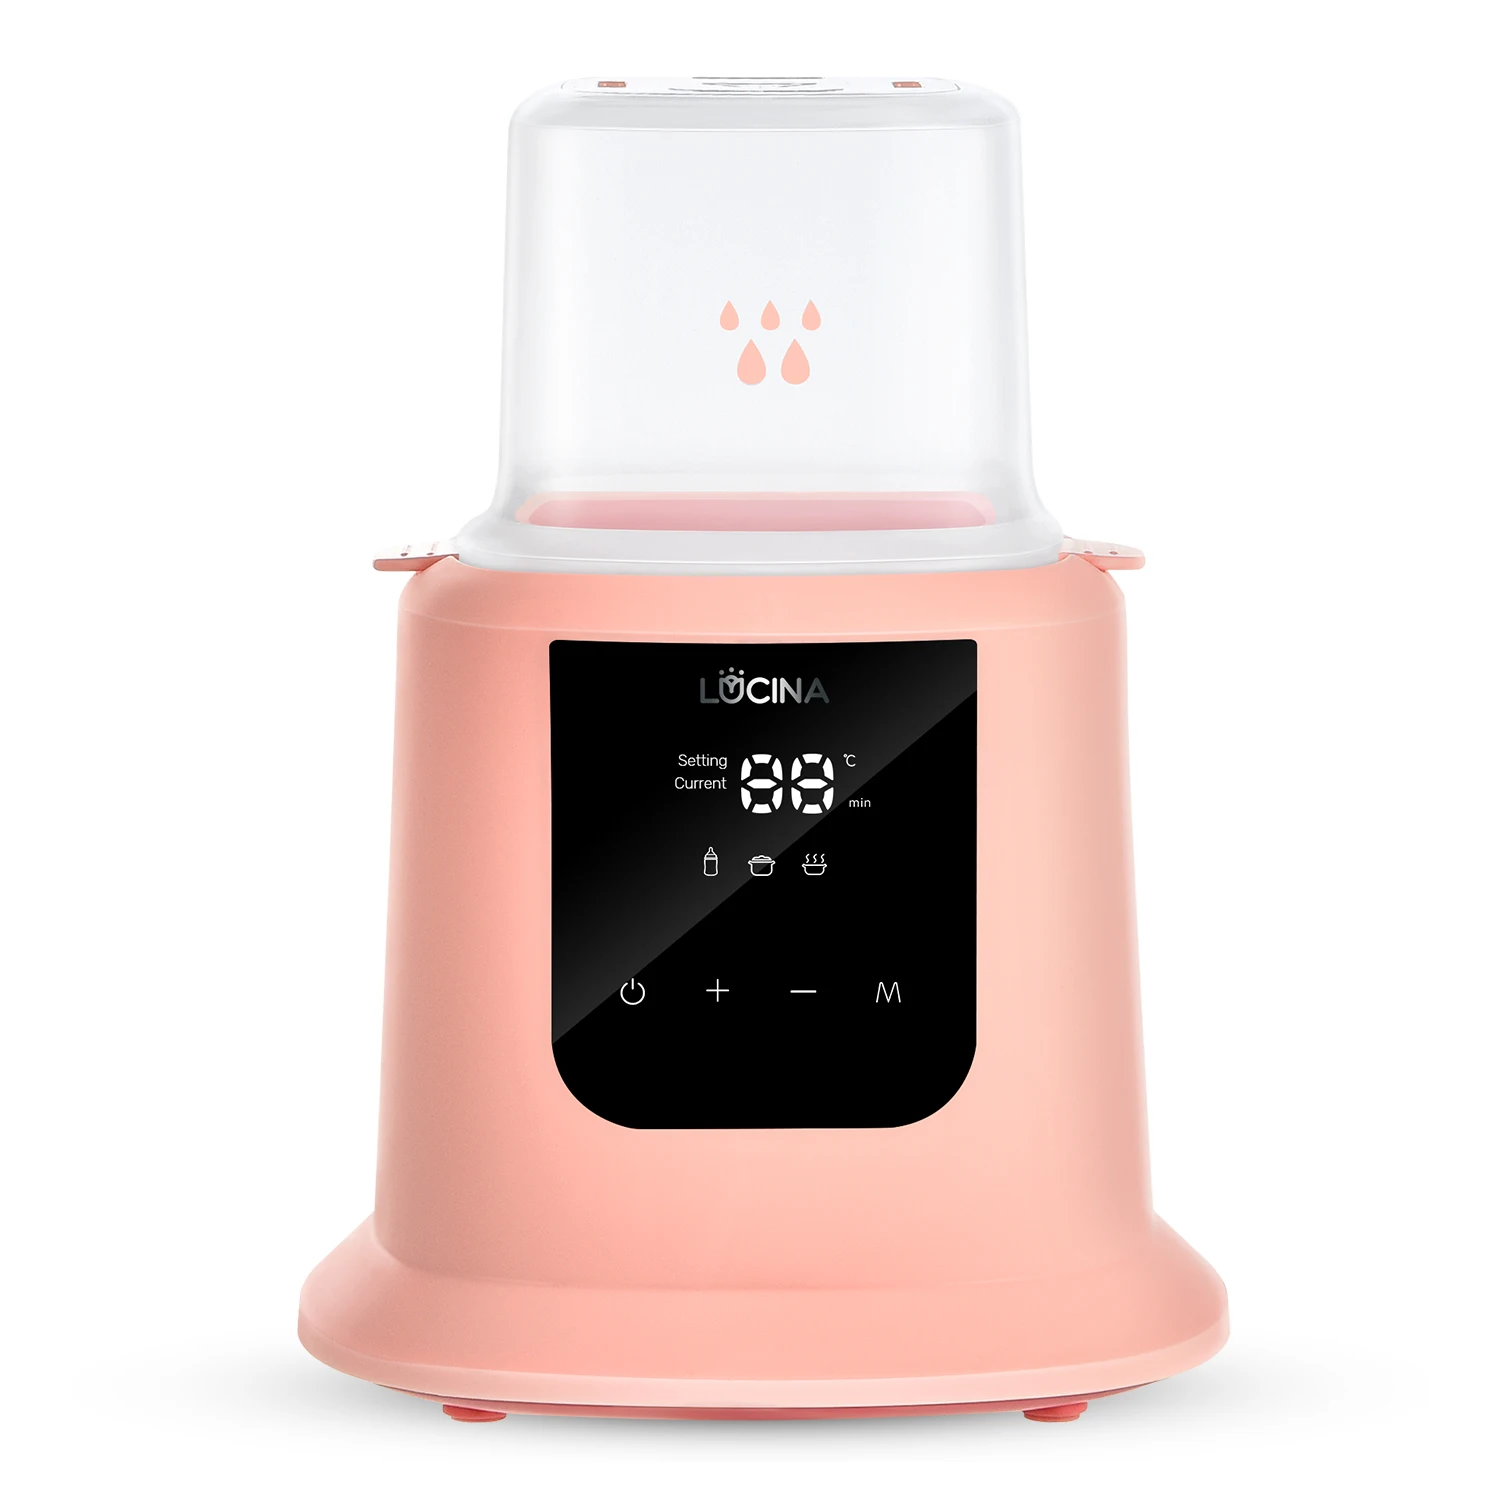 Baby Bottle Warmer Fast Breast Milk WarmerBaby Food Heater with LCD Display Accurate Temperature Control Fit All Baby Bottles